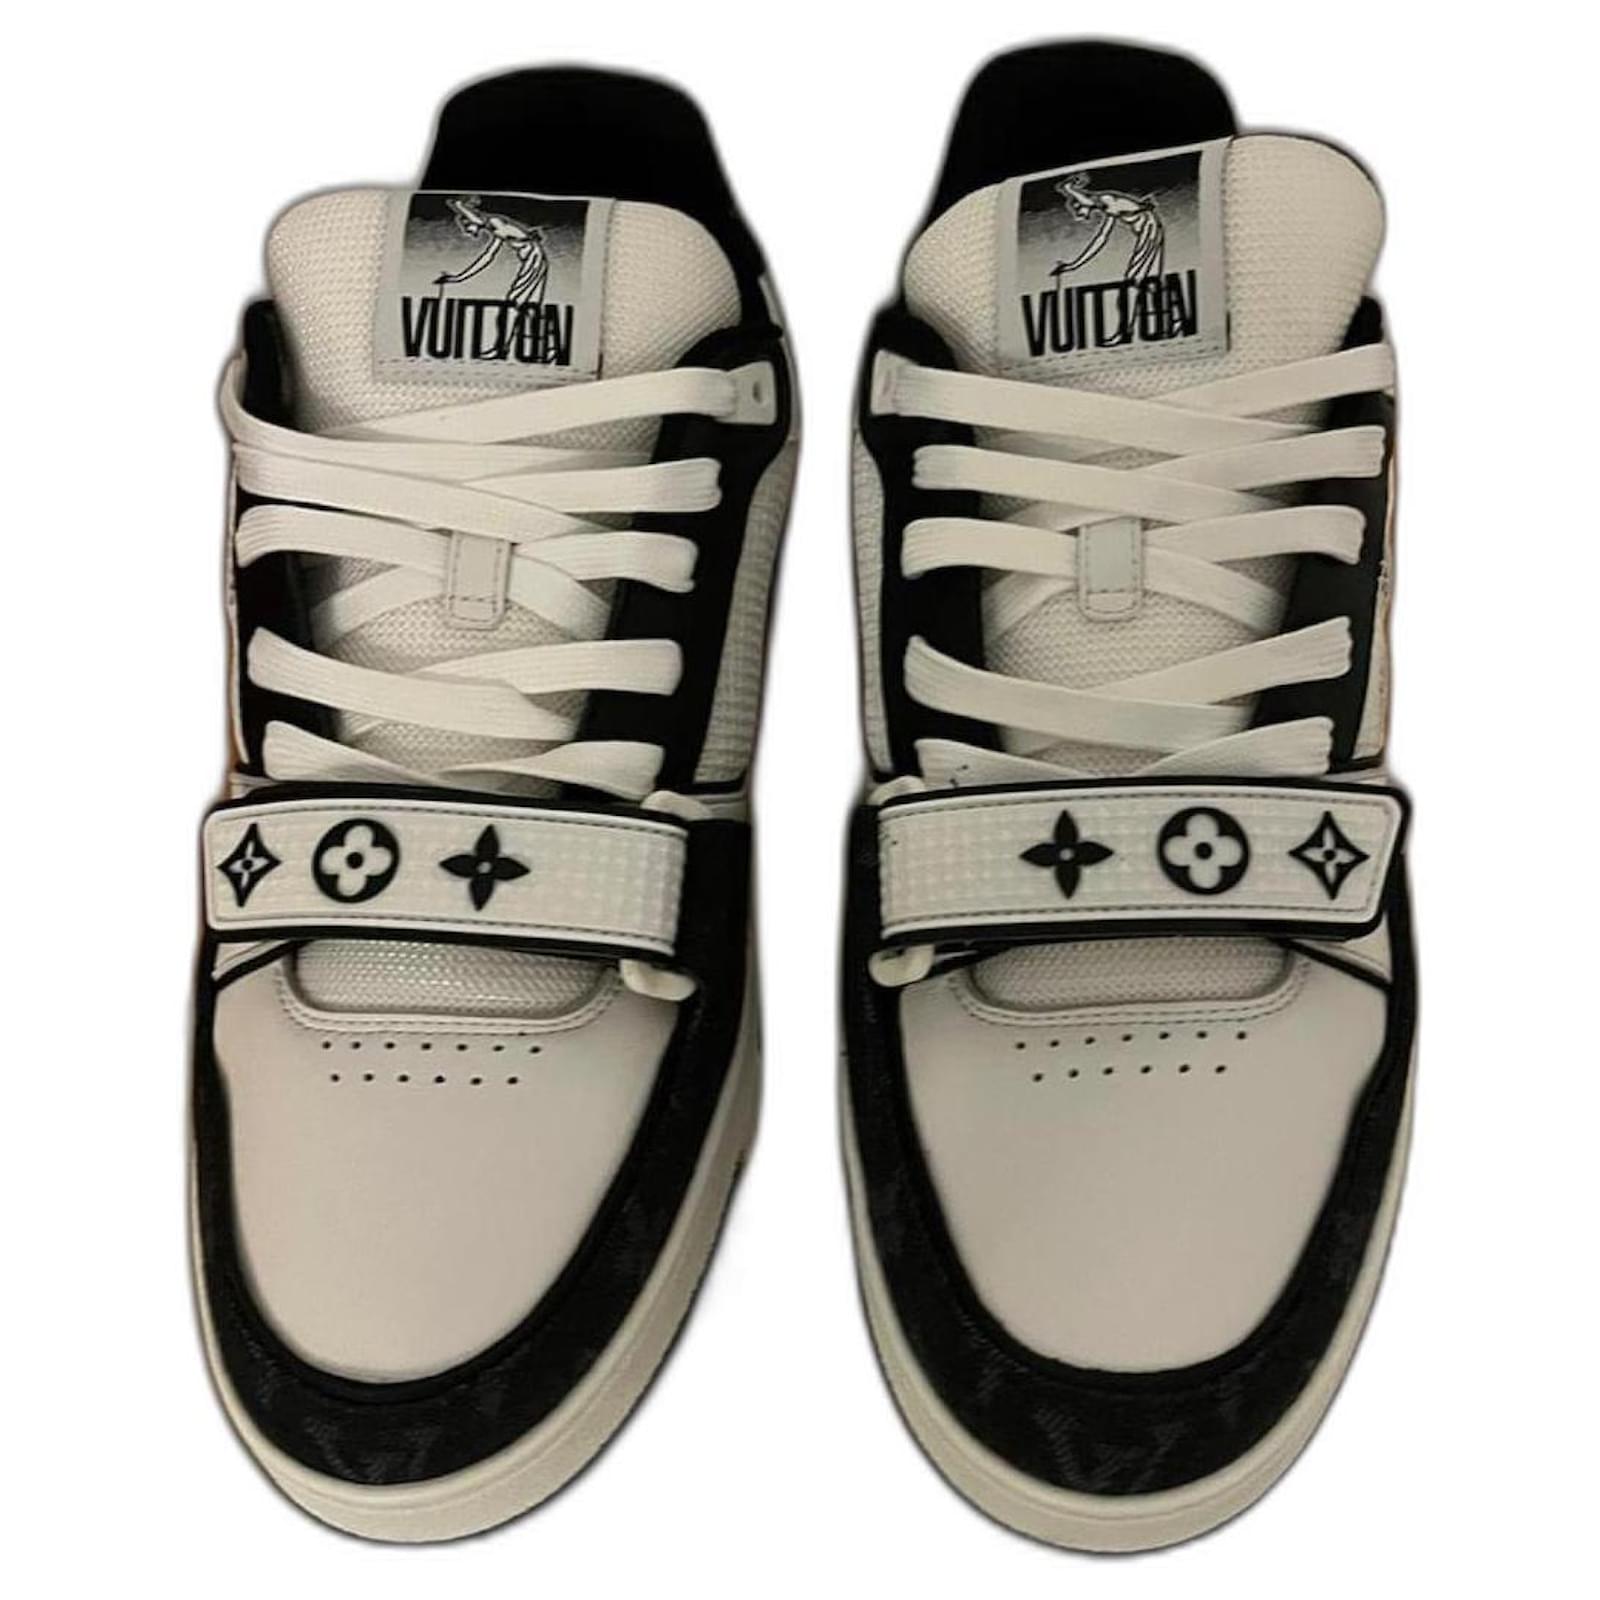 Louis Vuitton Men's Trainer Velcro Sneakers Leather and Mesh - ShopStyle